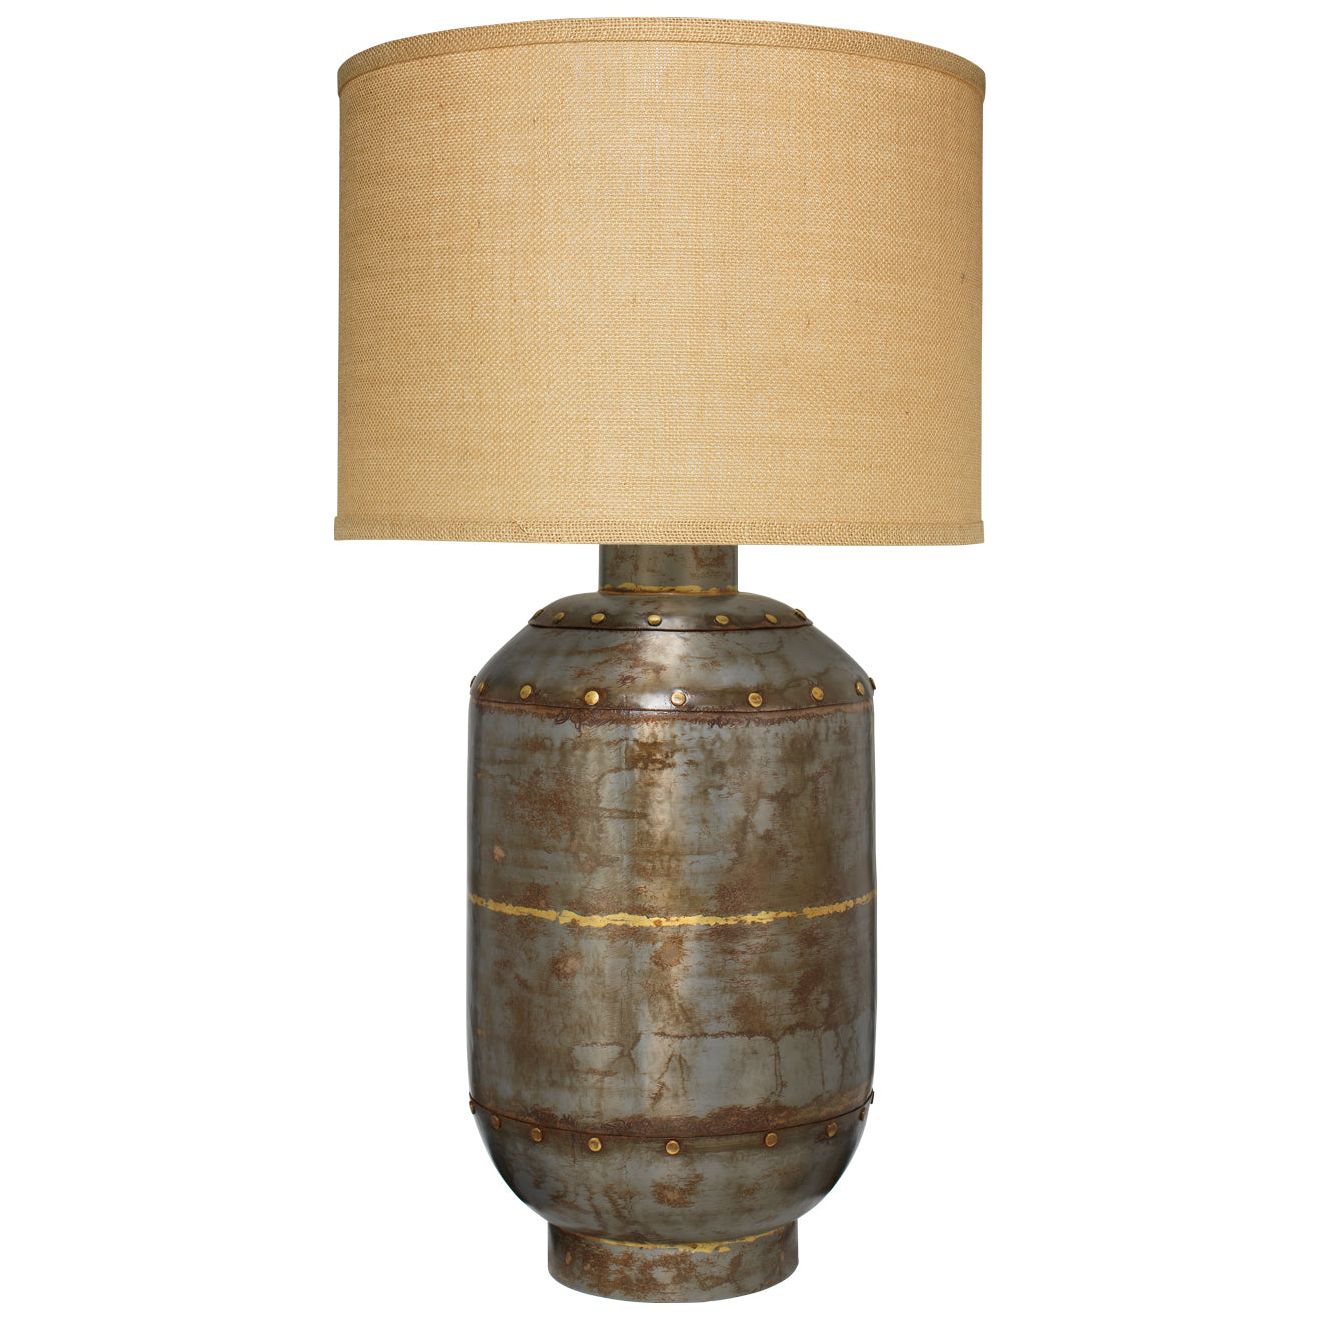 Jamie Young Company - 1CAIS-XLGM - Caisson Table Lamp - Caisson - Grey